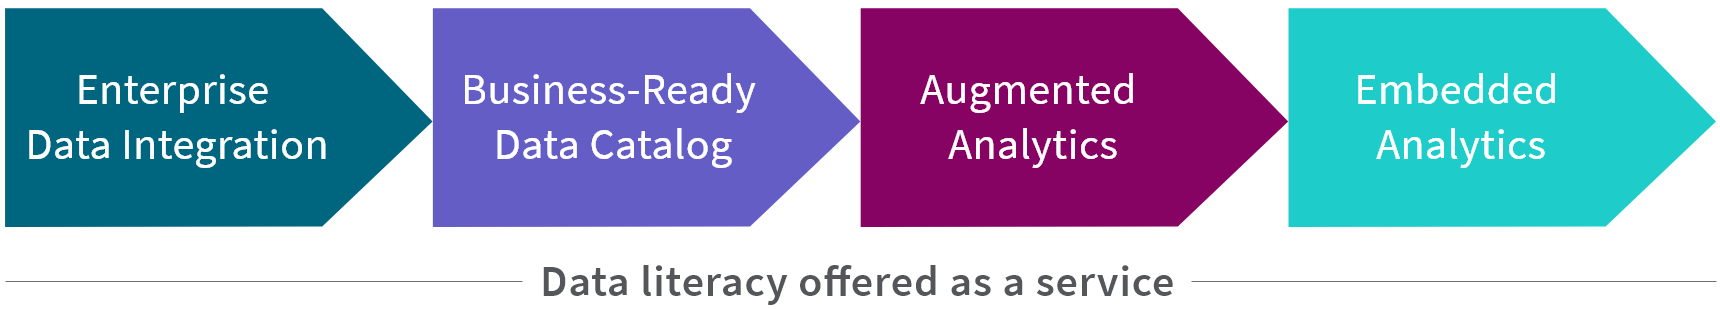 Data literacy offered as a service